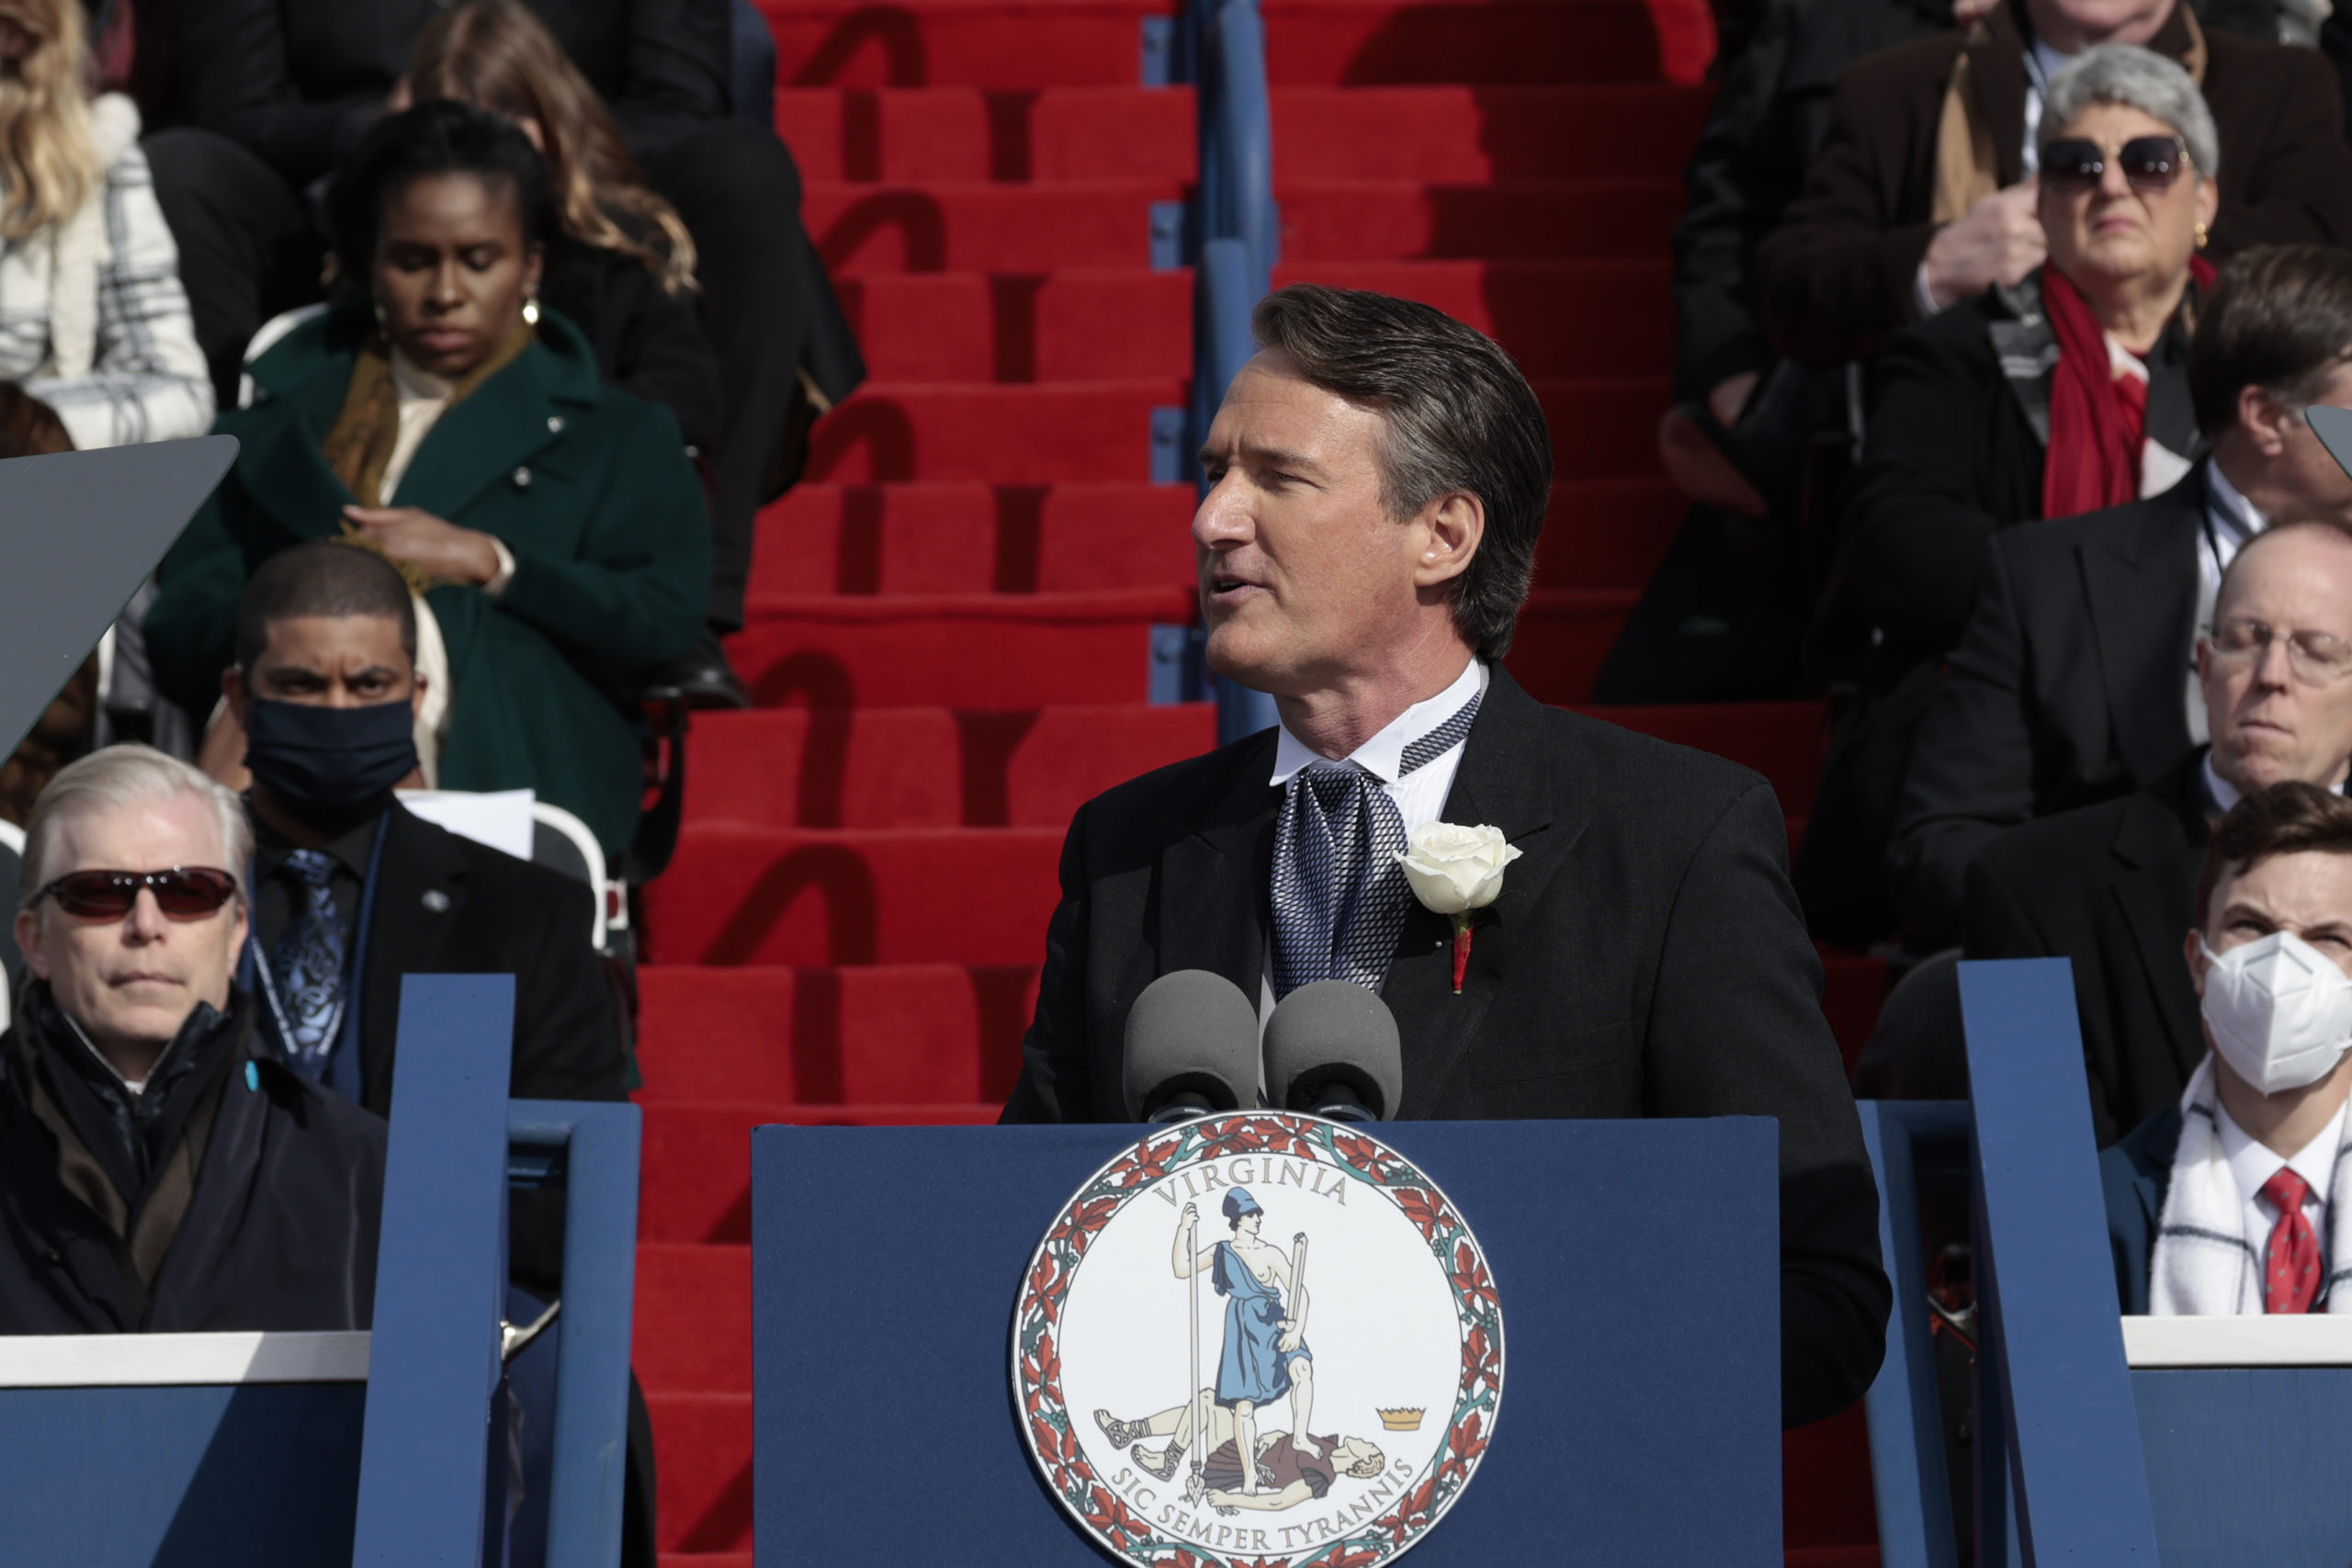 Virginia Governor Glenn Youngkin gives the inaugural address after being sworn in as the 74th governor of Virginia on the steps of the State Capitol on January 15, 2022 in Richmond, Virginia. Youngkin, who once served as co-CEO of the private equity firm The Carlyle Group, is the first Republican Governor elected to govern the Virginian commonwealth since 2009. (Photo by Anna Moneymaker/Getty Images)